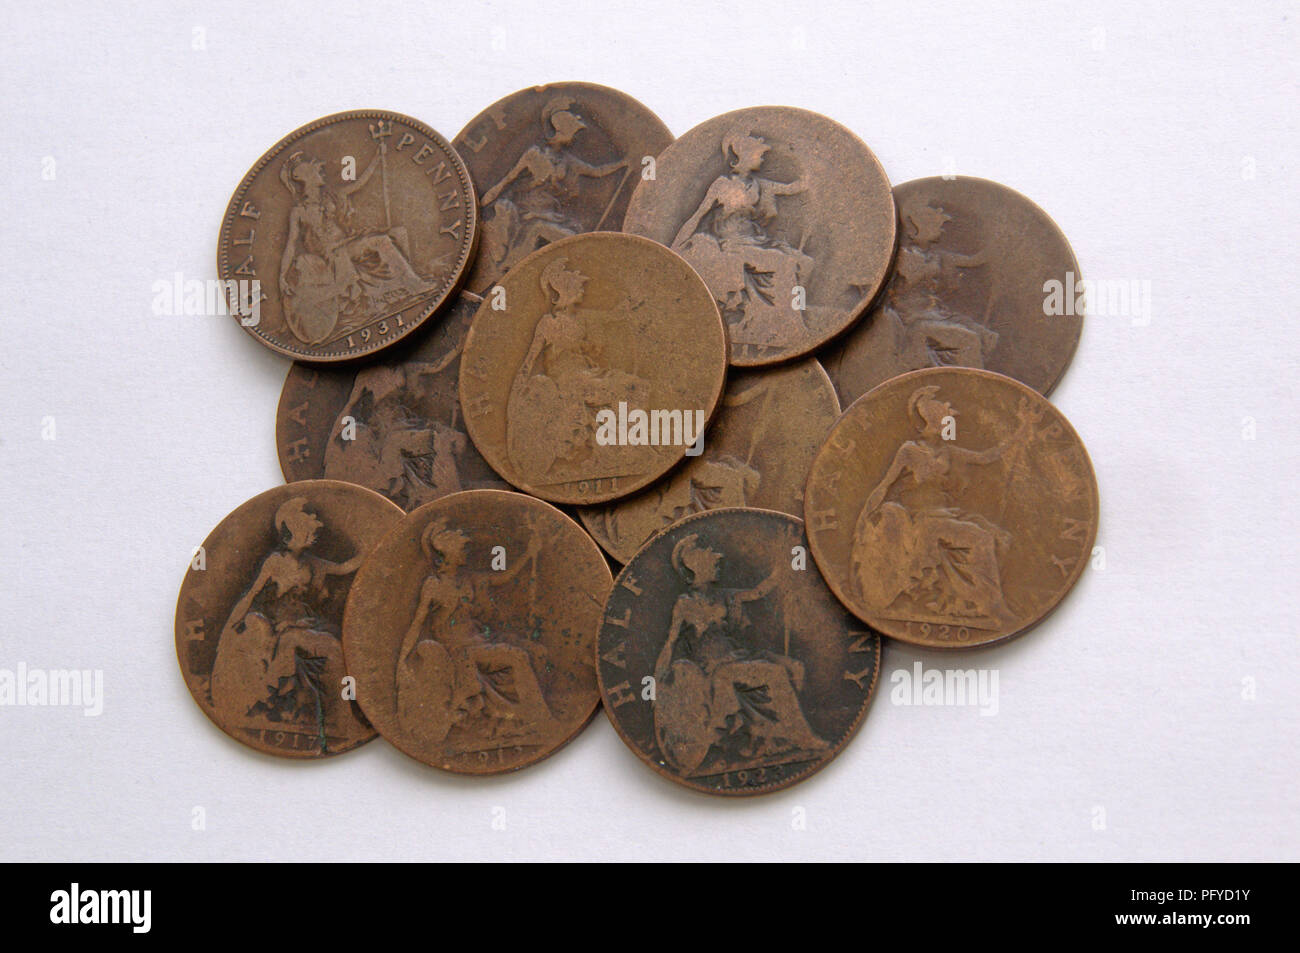 Pile of old British halfpenny coins Stock Photo